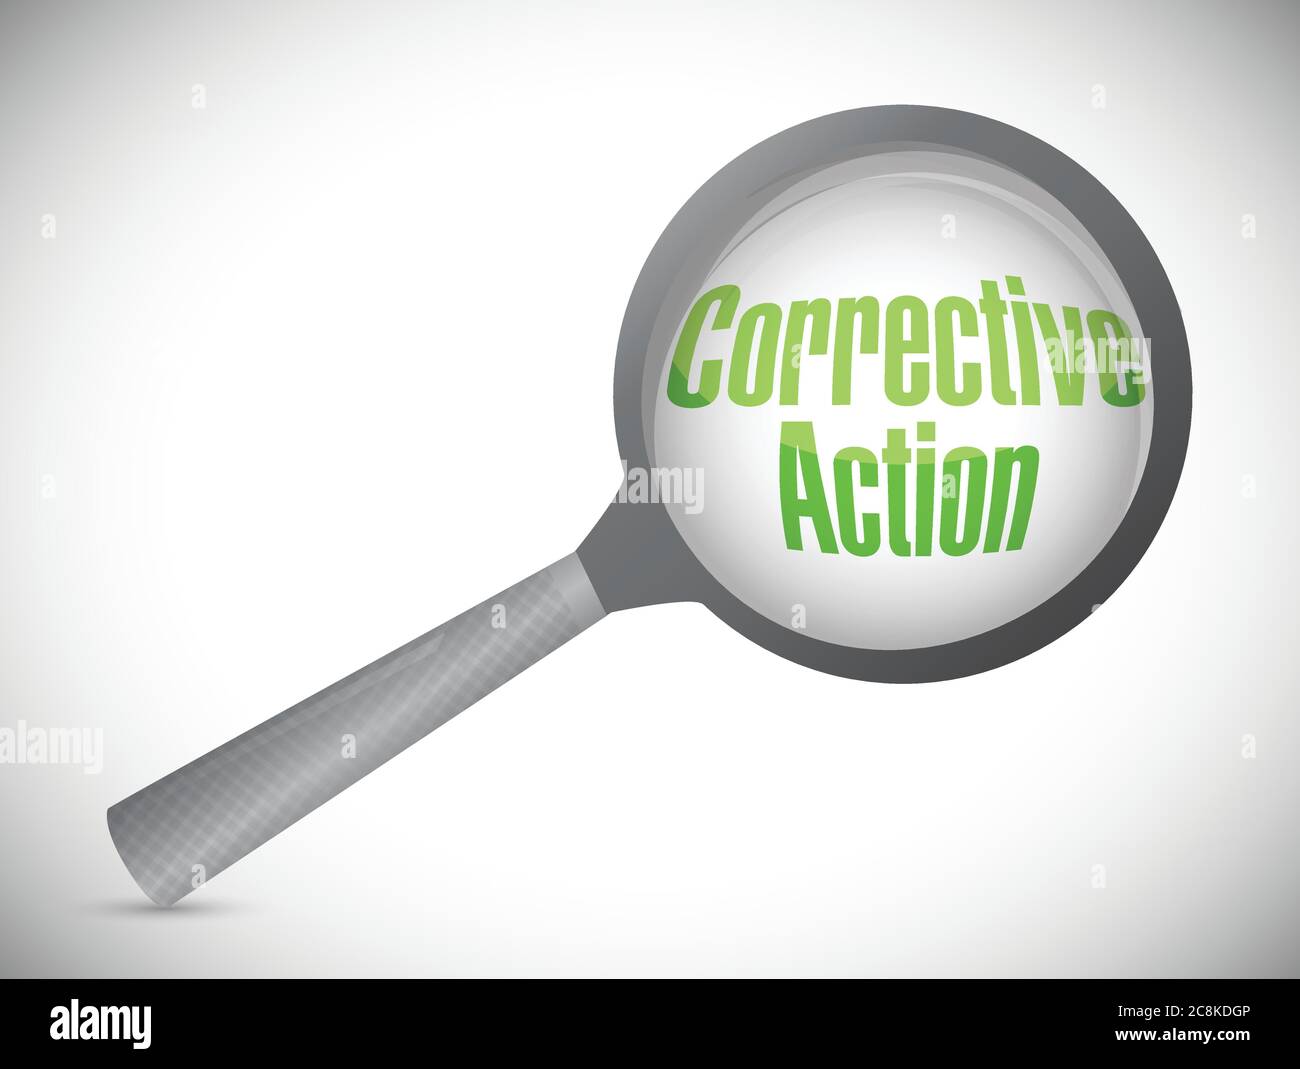 Corrective action under a magnify glass. illustration design over a white background Stock Vector